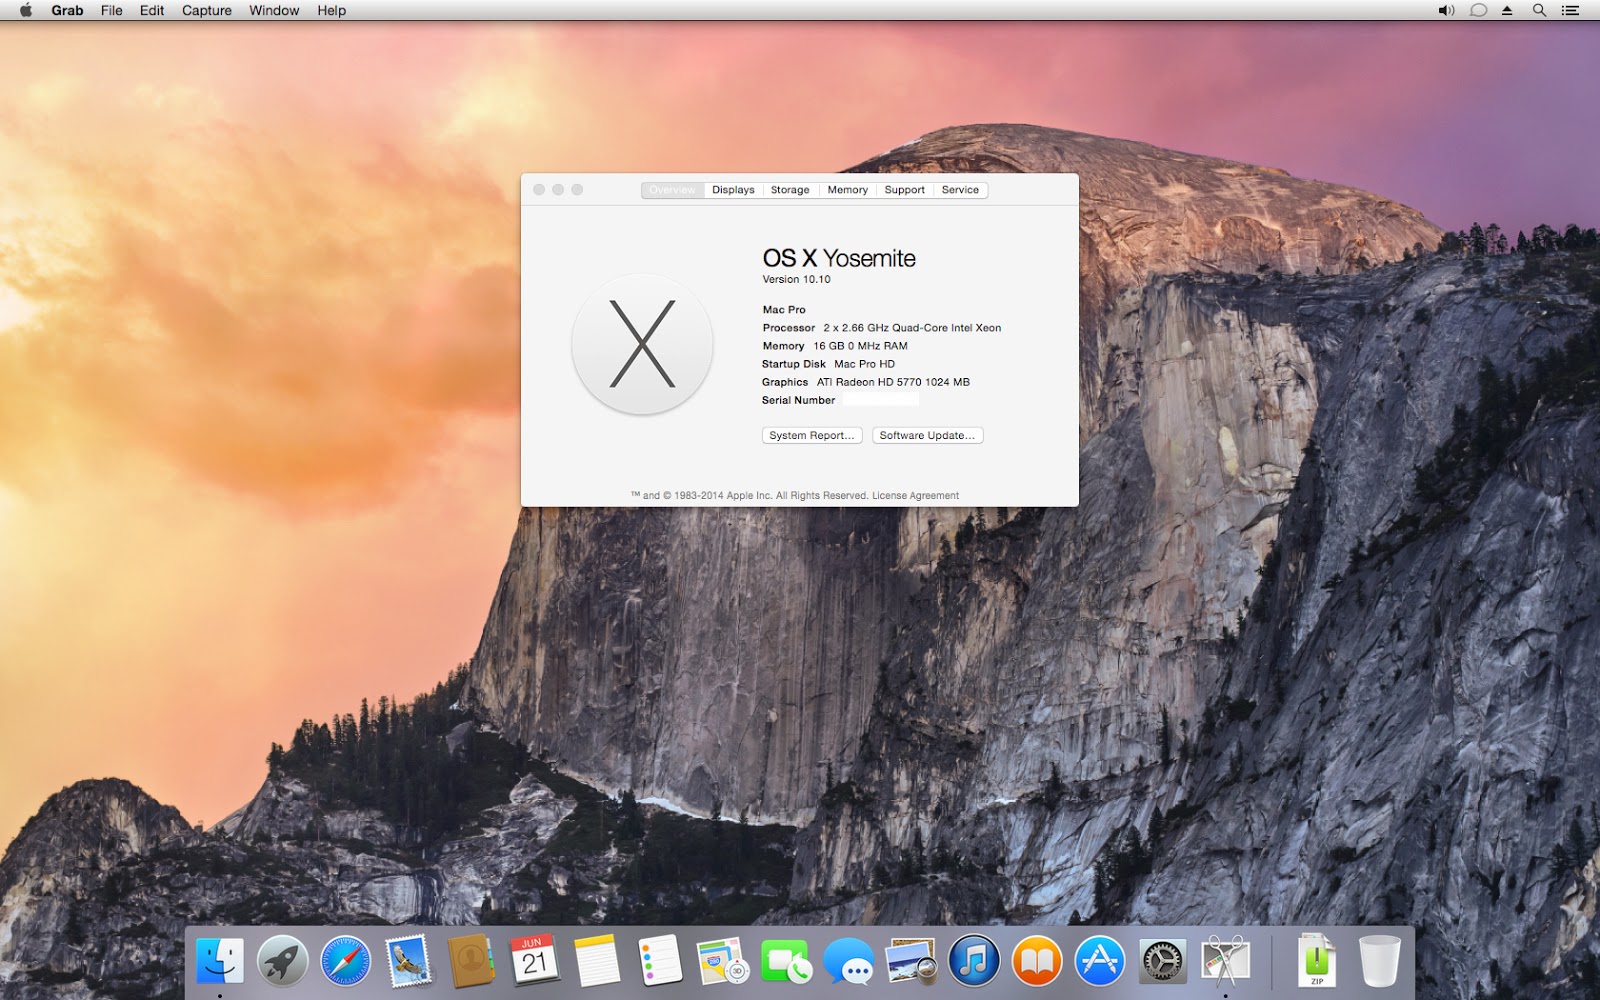 os x 10.10 download for mac